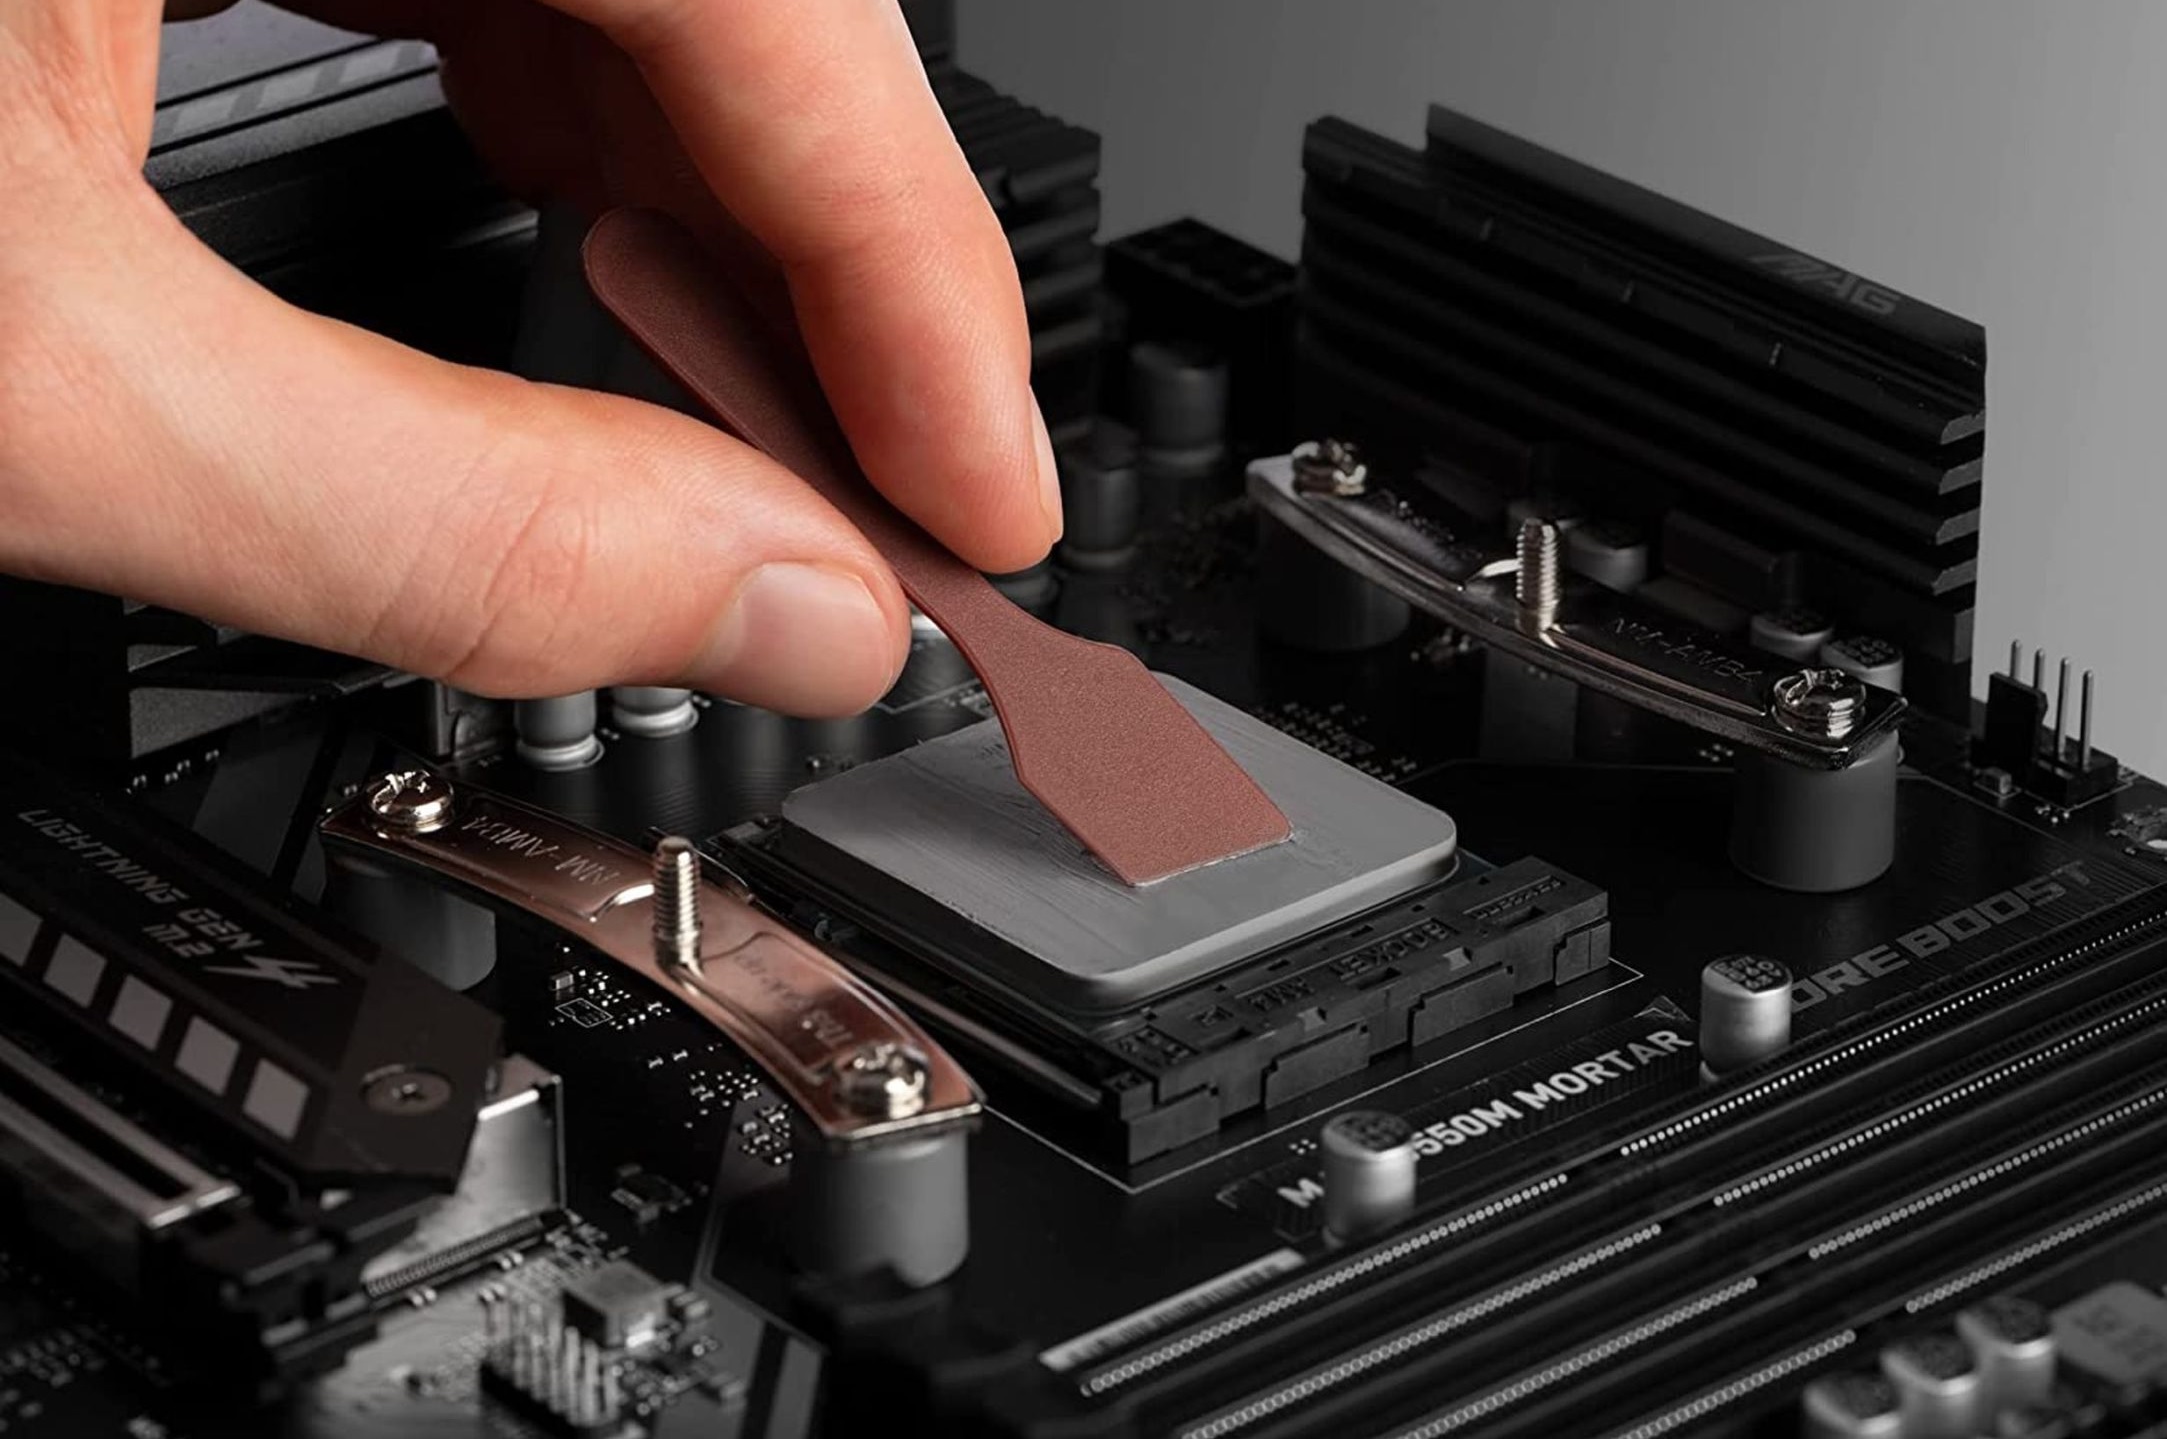 Commentary: Is adding a spatula to the Noctua NT-H1 useful? 